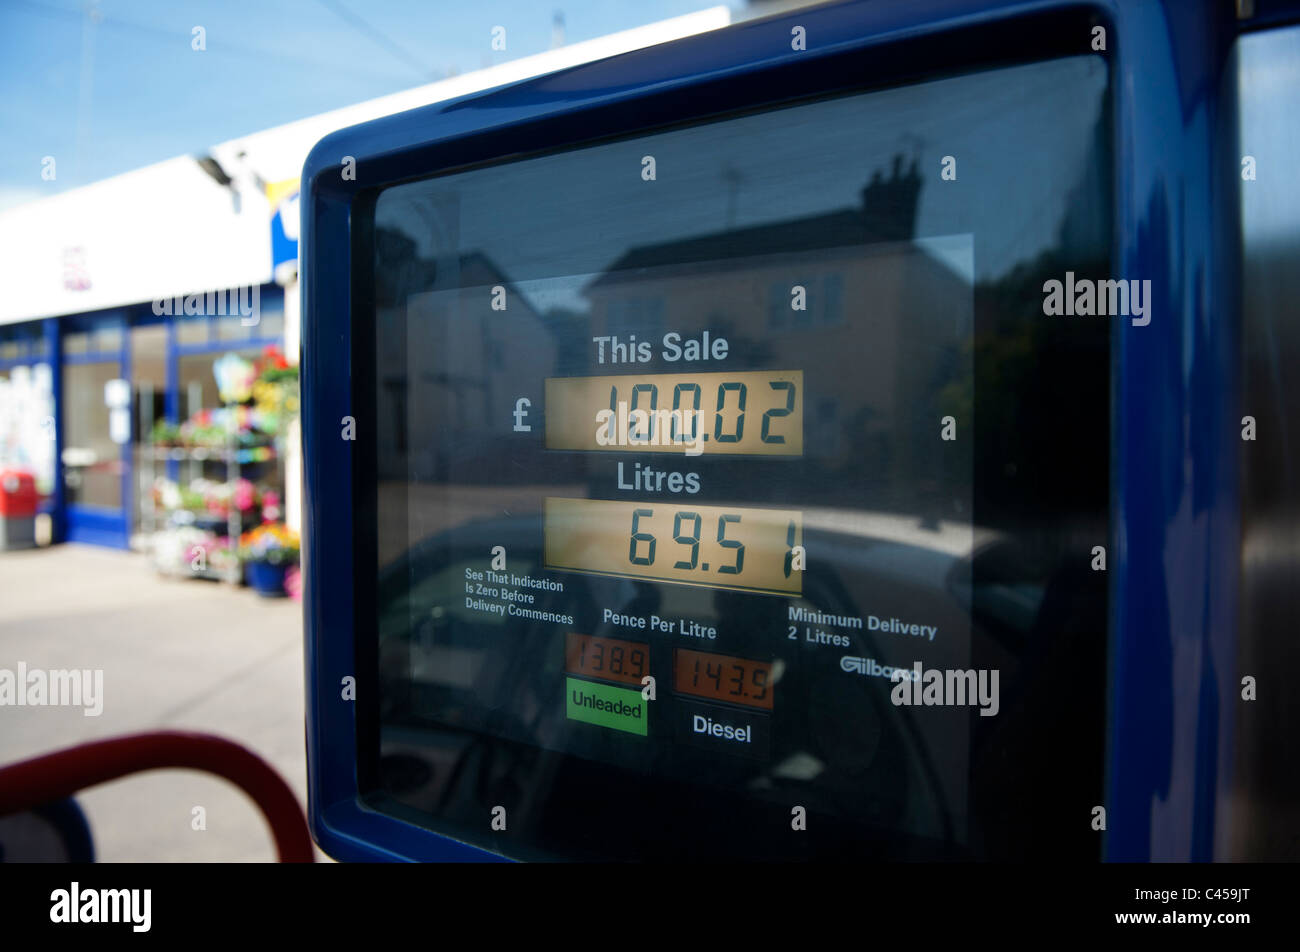 For the first time my fuel tank refuel was 2p over £100.....Steeple Bumpstead, essex,England. 1 June 2011 Stock Photo